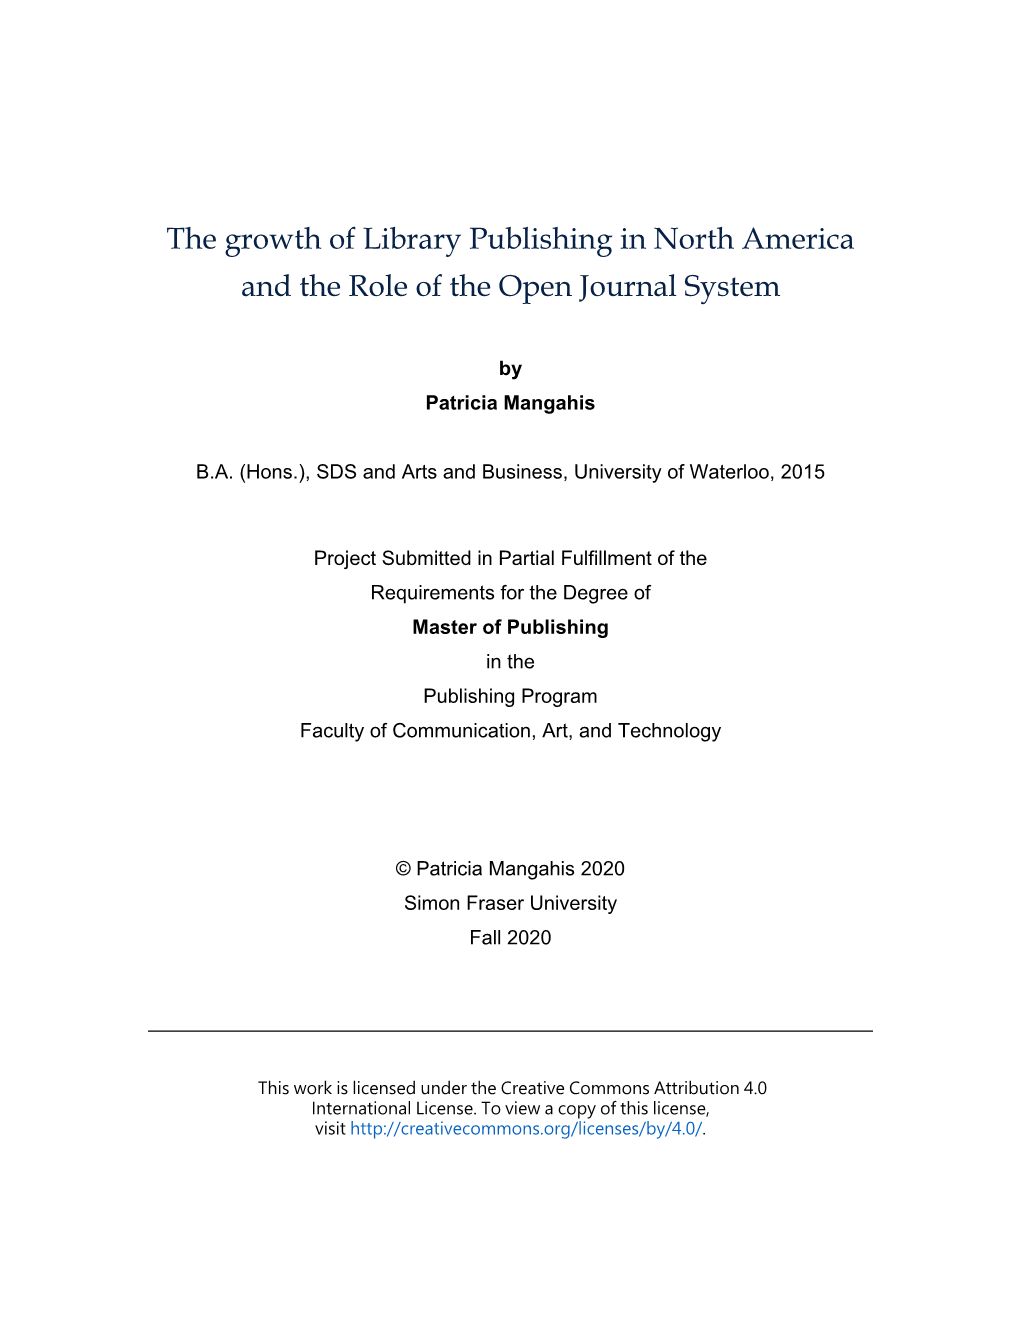 The Growth of Library Publishing in North America and the Role of the Open Journal System